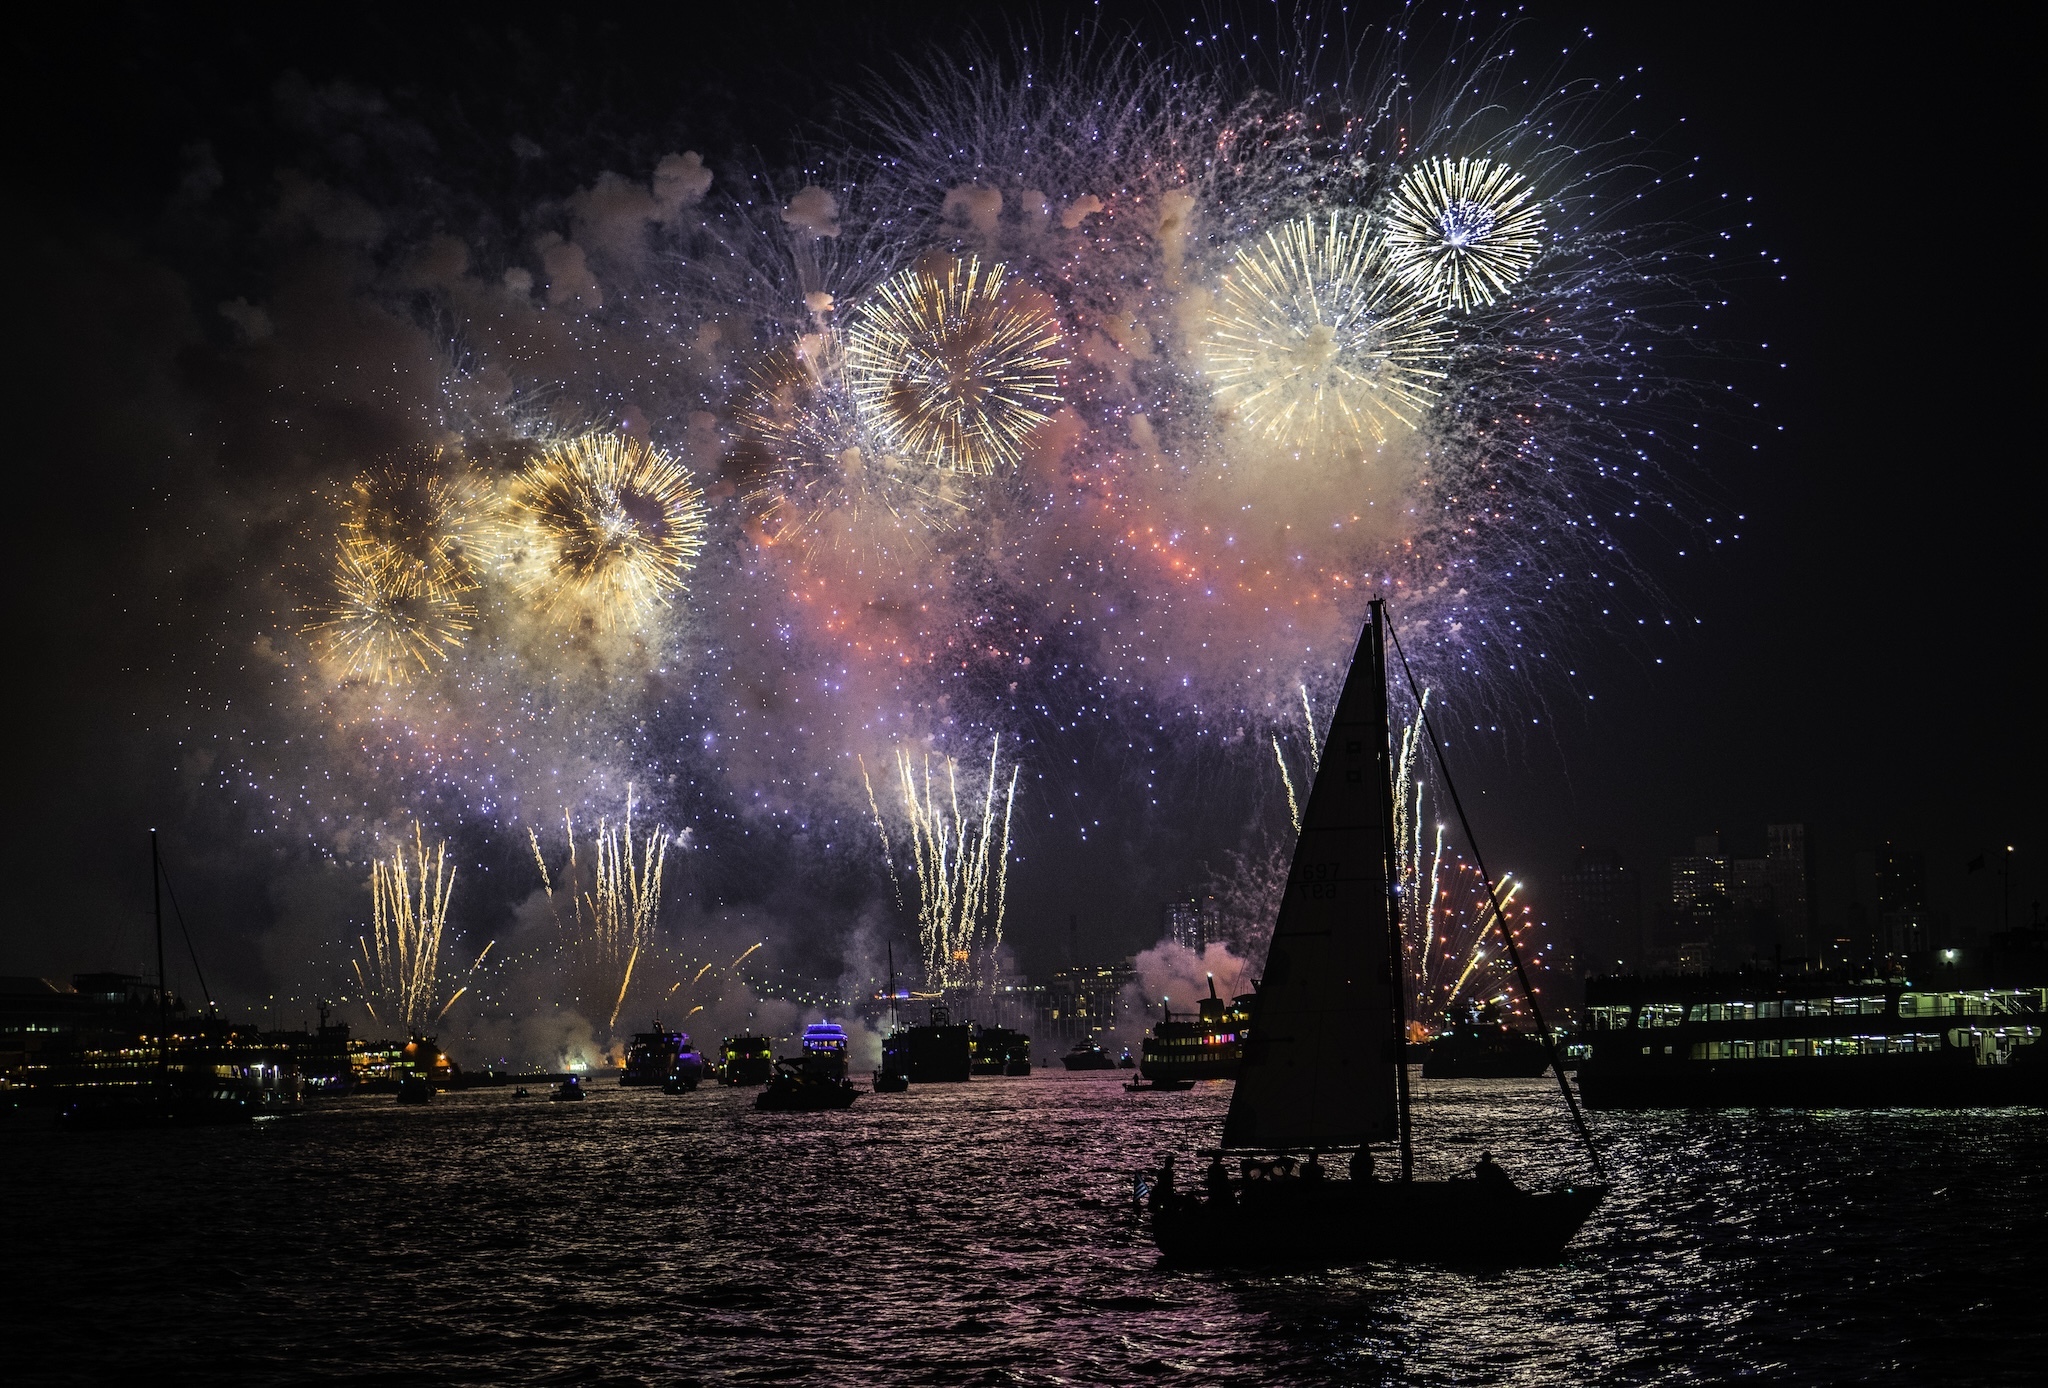 NYC is offering free tickets for Macy’s 4th July fireworks: here’s how to get them